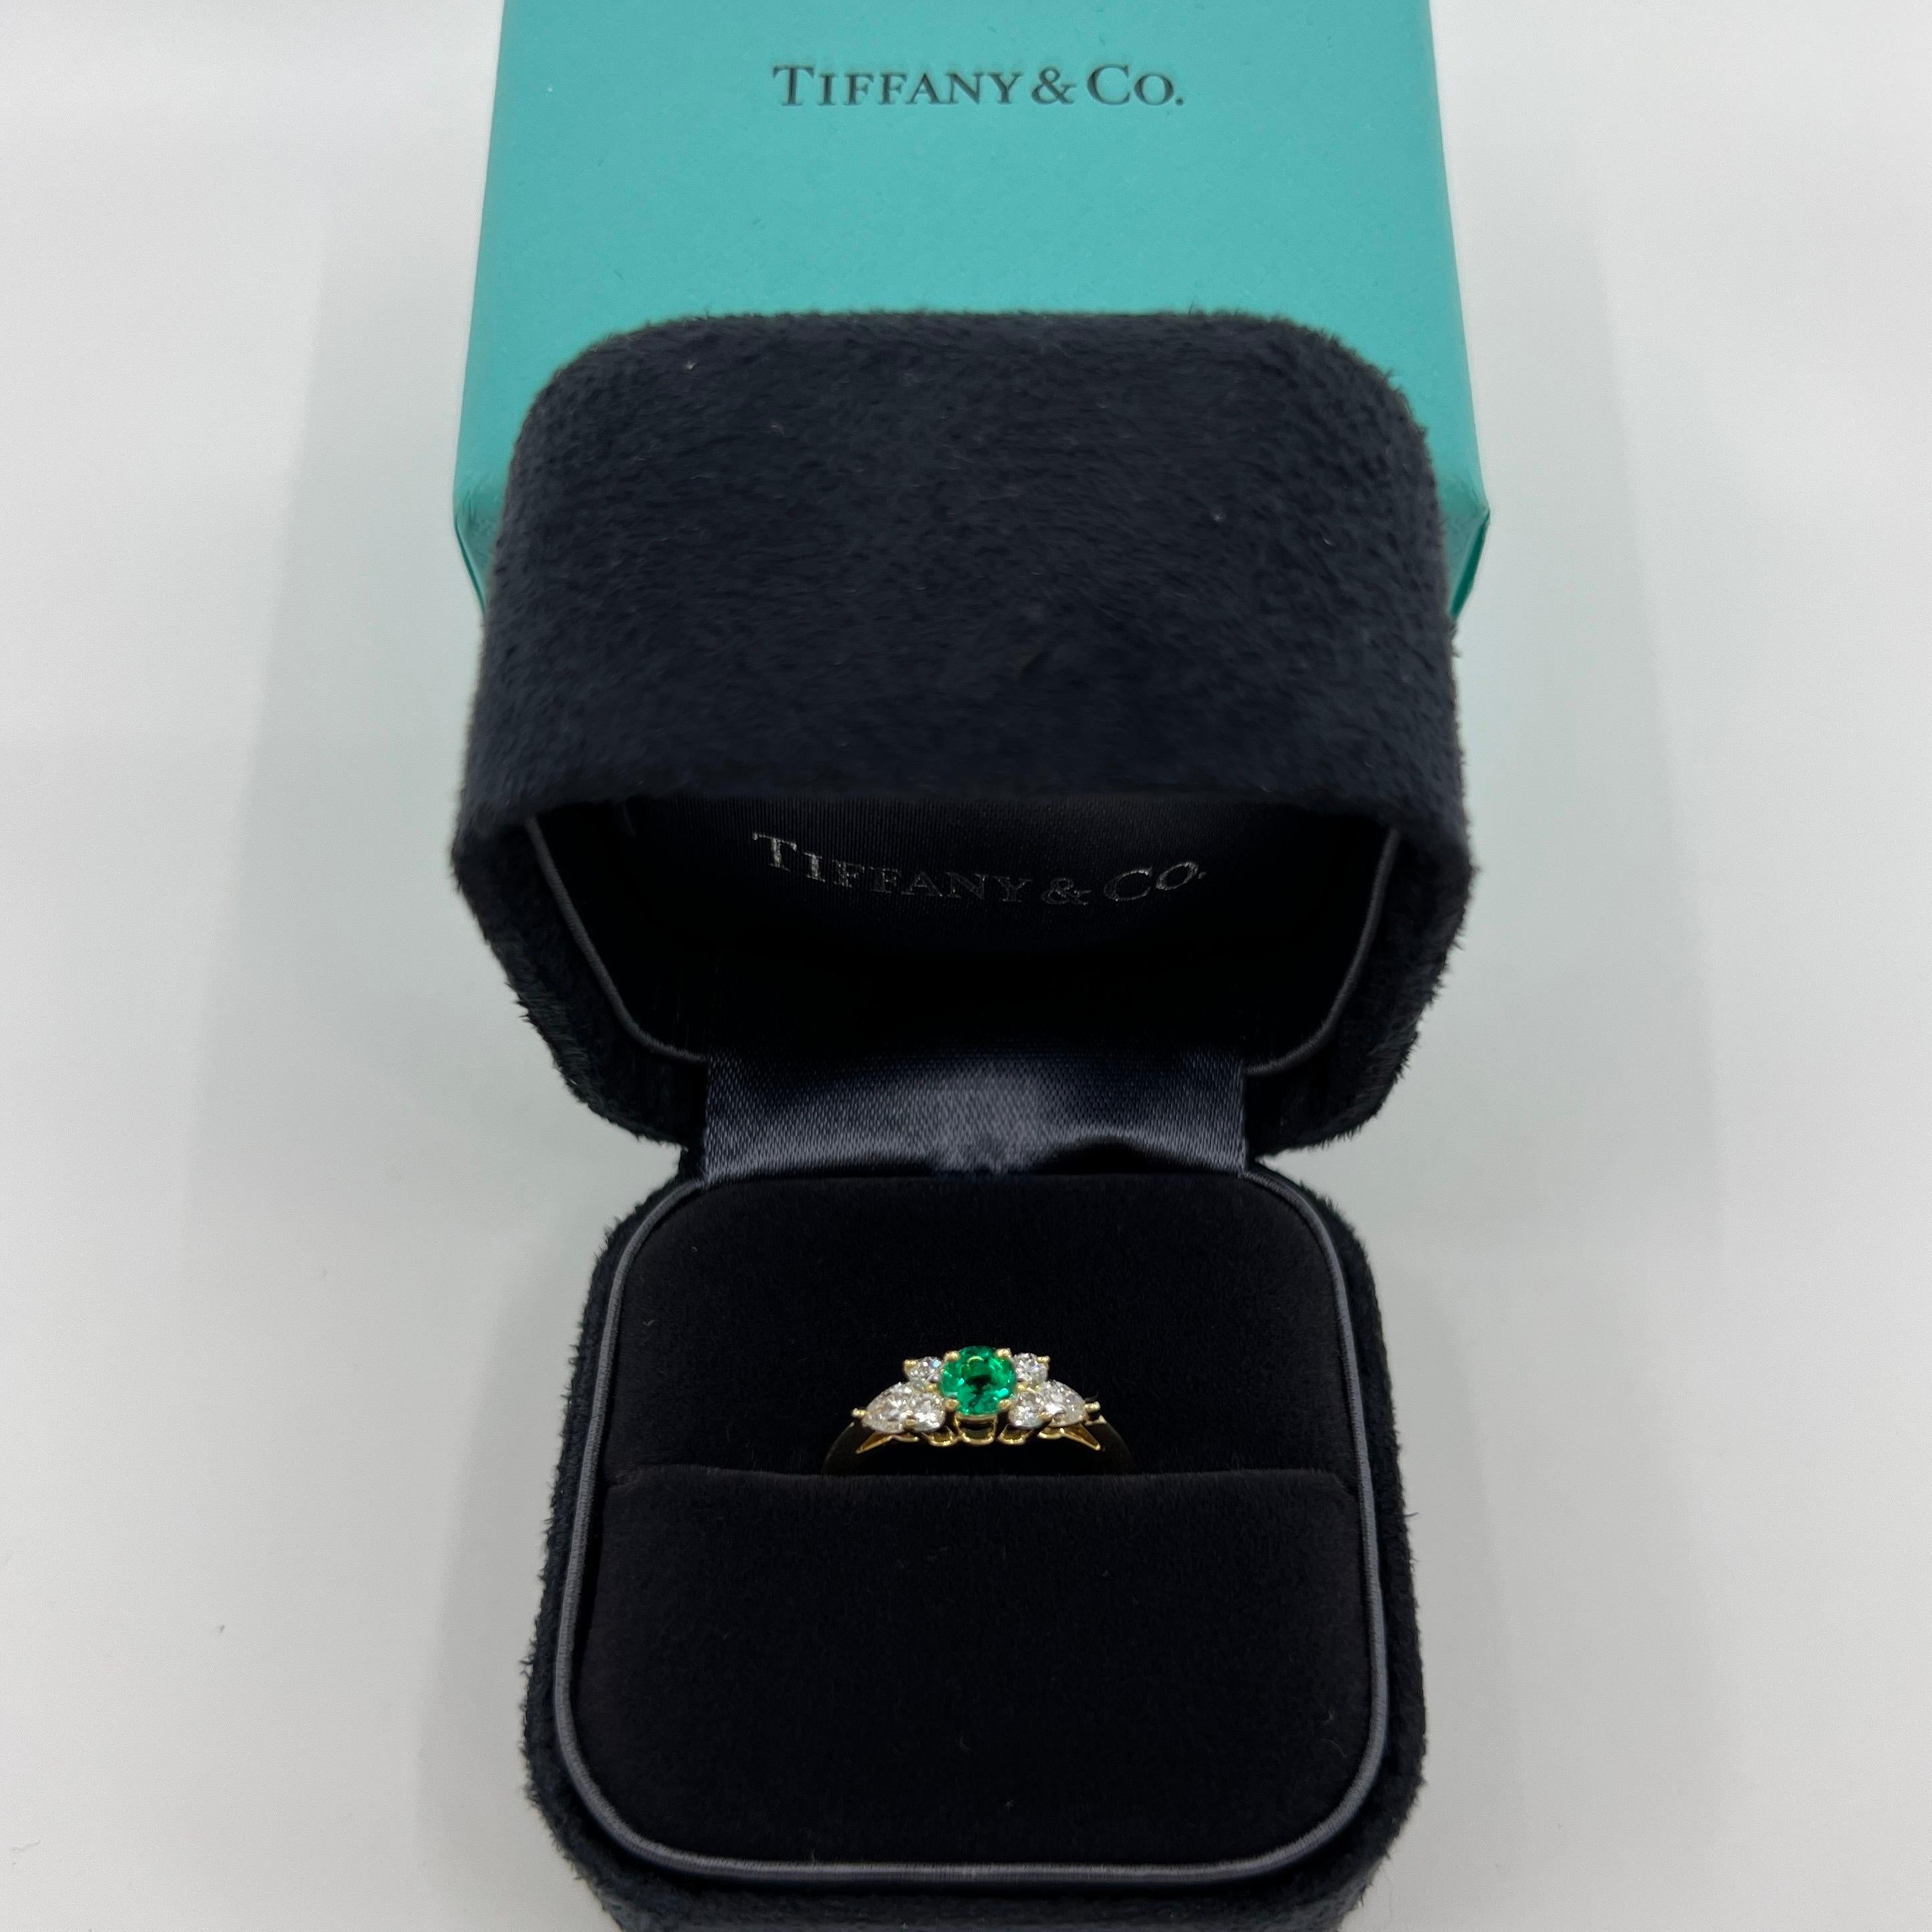 Rare Tiffany & Co. Emerald & Diamond Buttercup 18k Yellow Gold Ring.

A beautifully made yellow gold cluster ring set with a stunning 3.8mm deep vivid green round cut emerald. Superb colour, clarity and cut on this stone.

Surrounded by x6 top